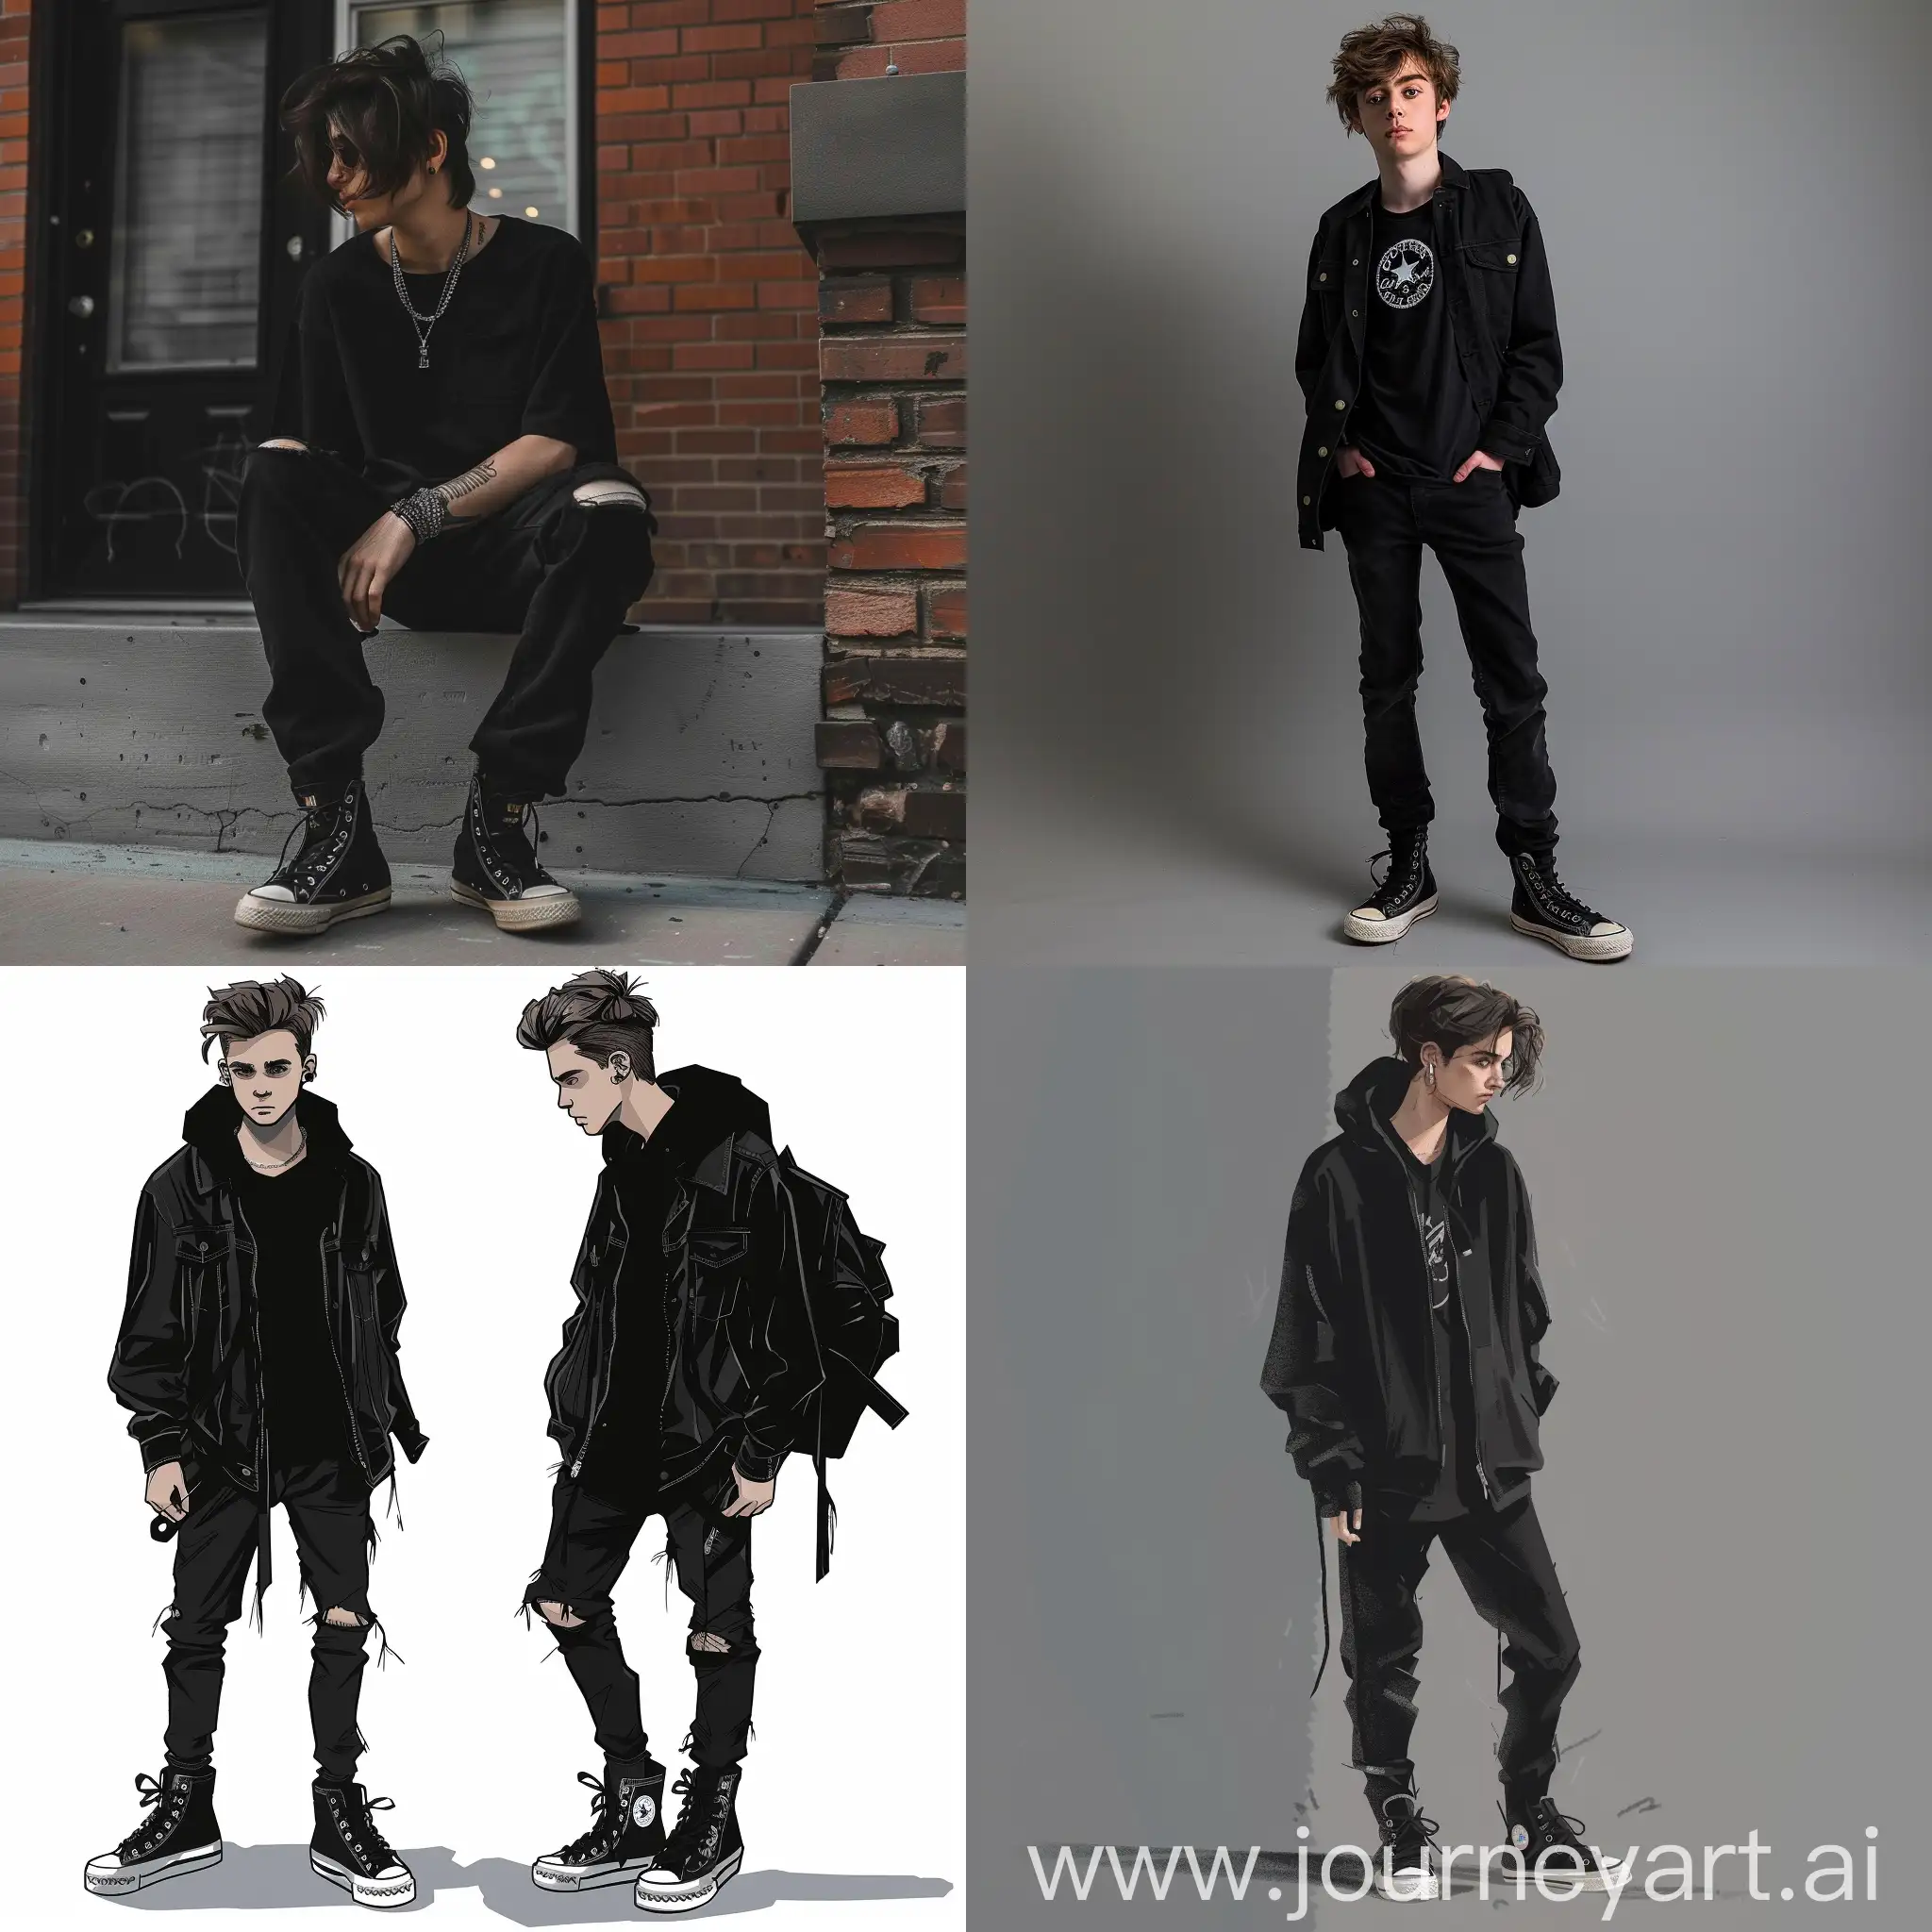 All black clothing guy teen with converse on in Tim burton style